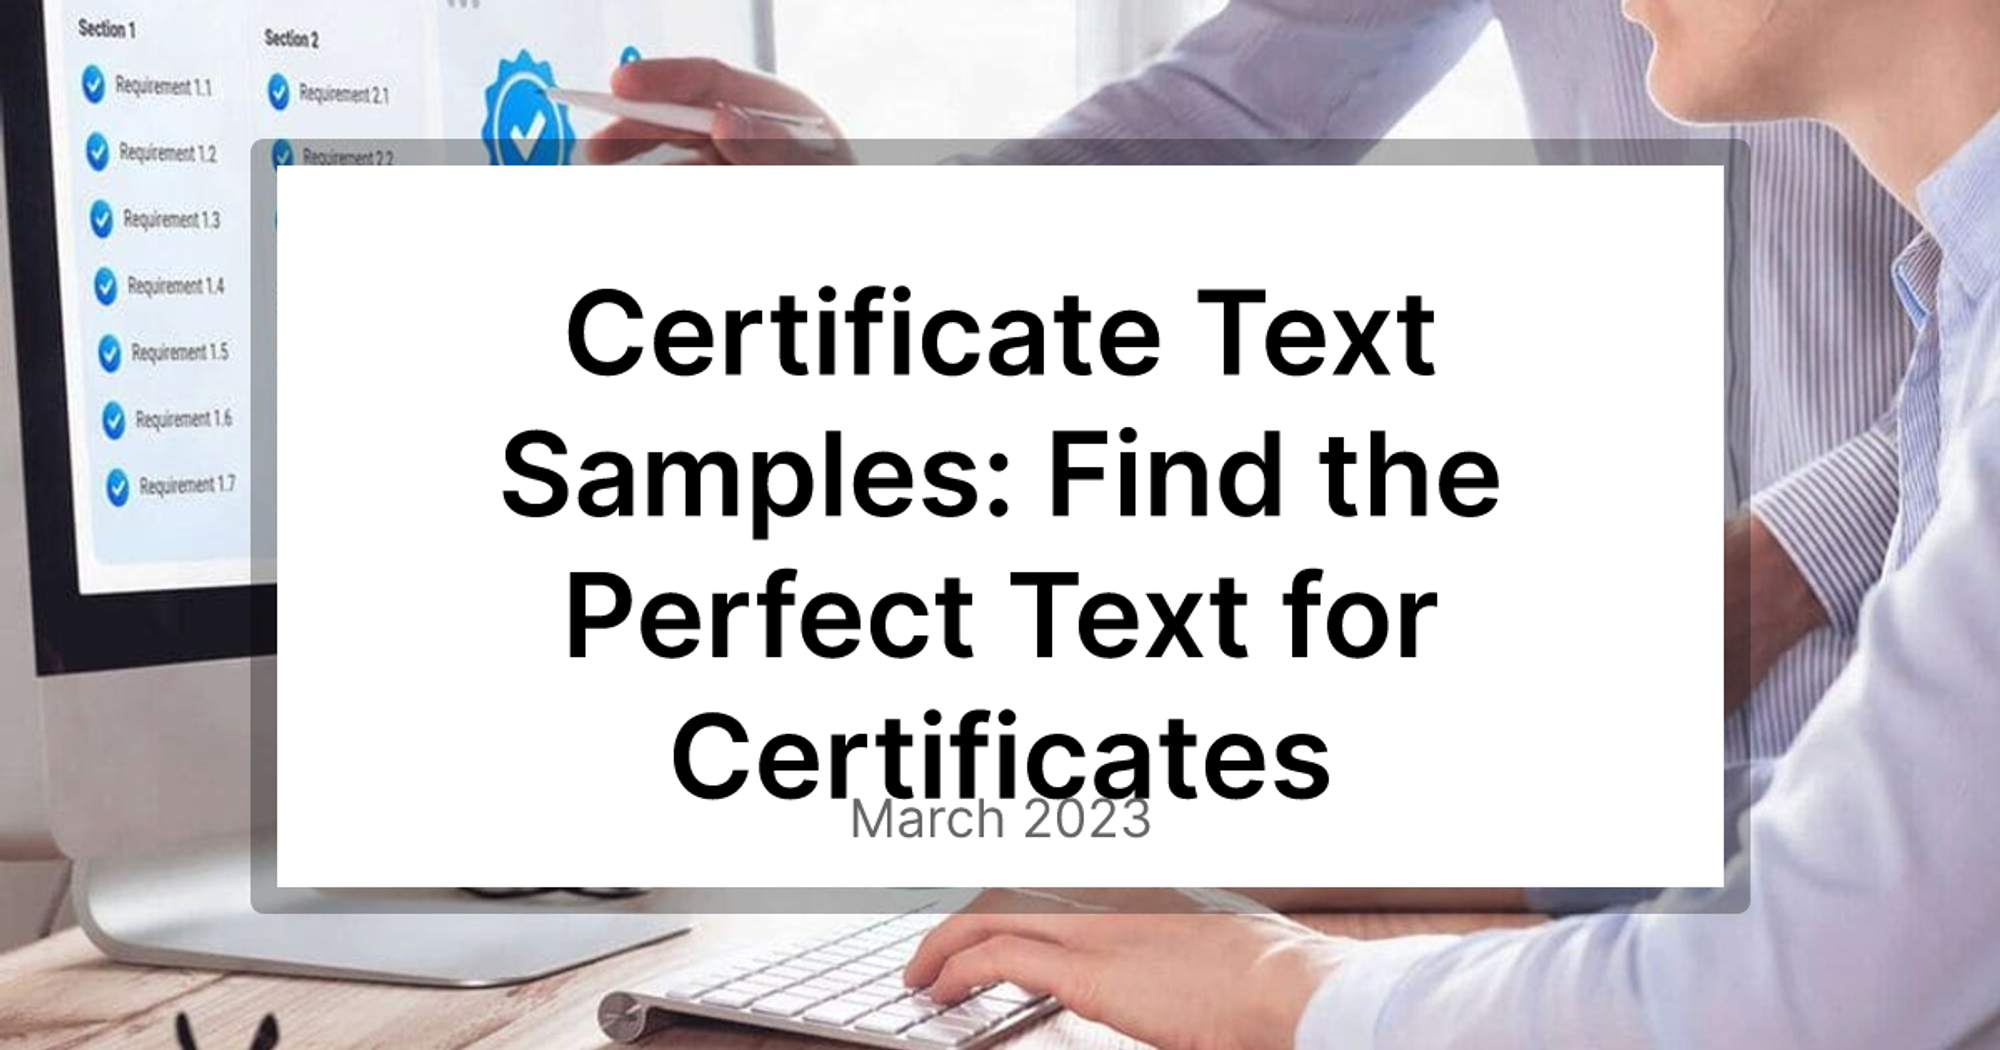 Certificate Text Samples: Find the Perfect Text for Certificates